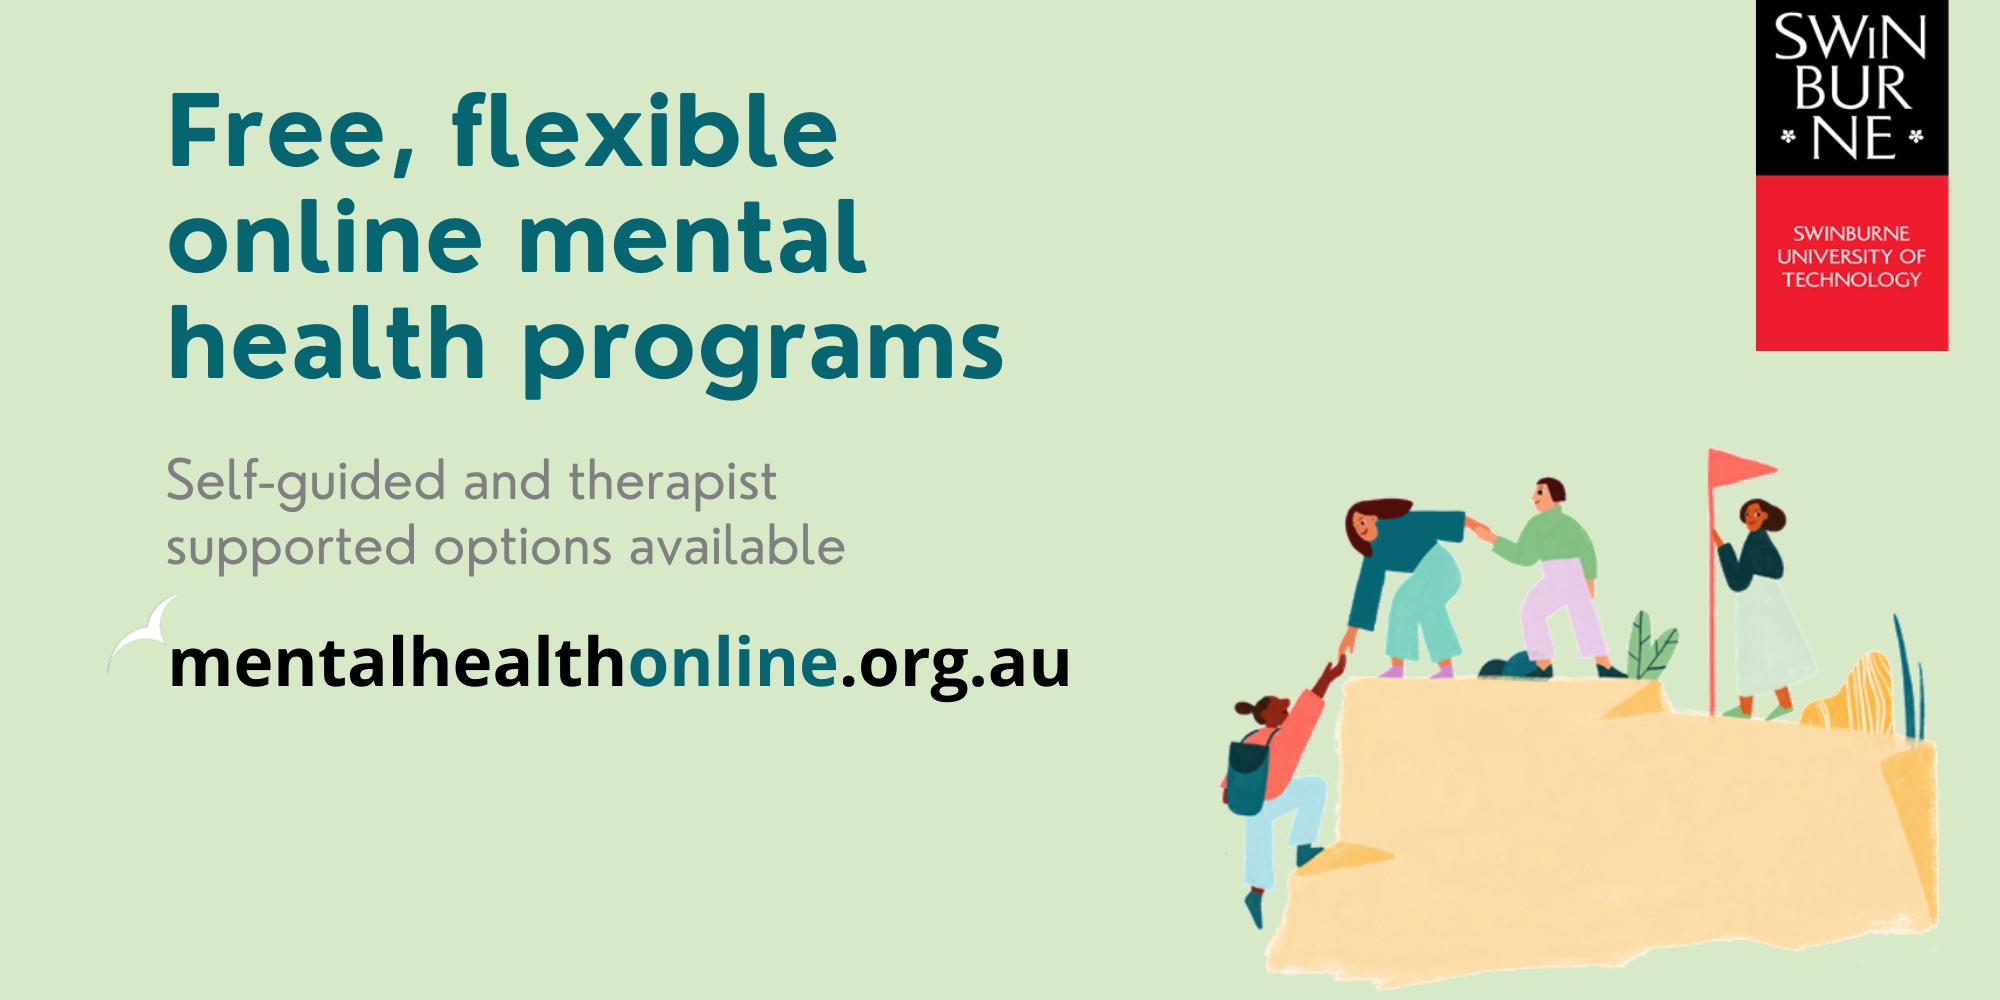 Digital Mental Health Programs – Where Do They Fit?